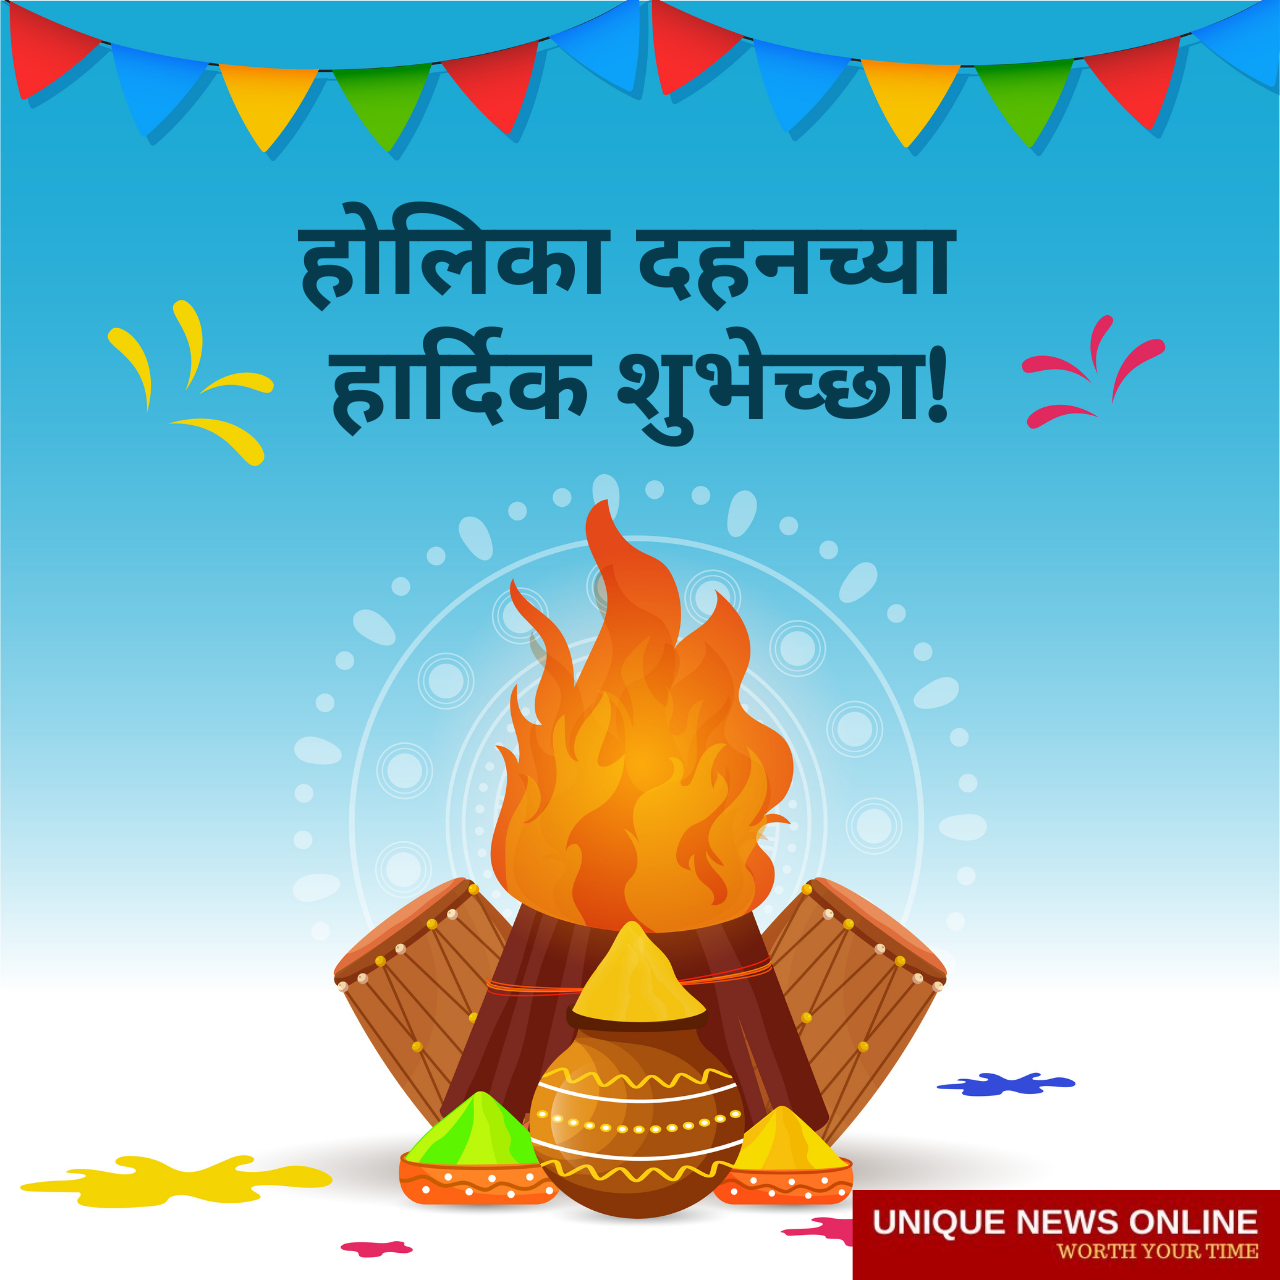 Happy Holika Dahan 2021 Wishes in Marathi, Greetings, Messages, Images ...